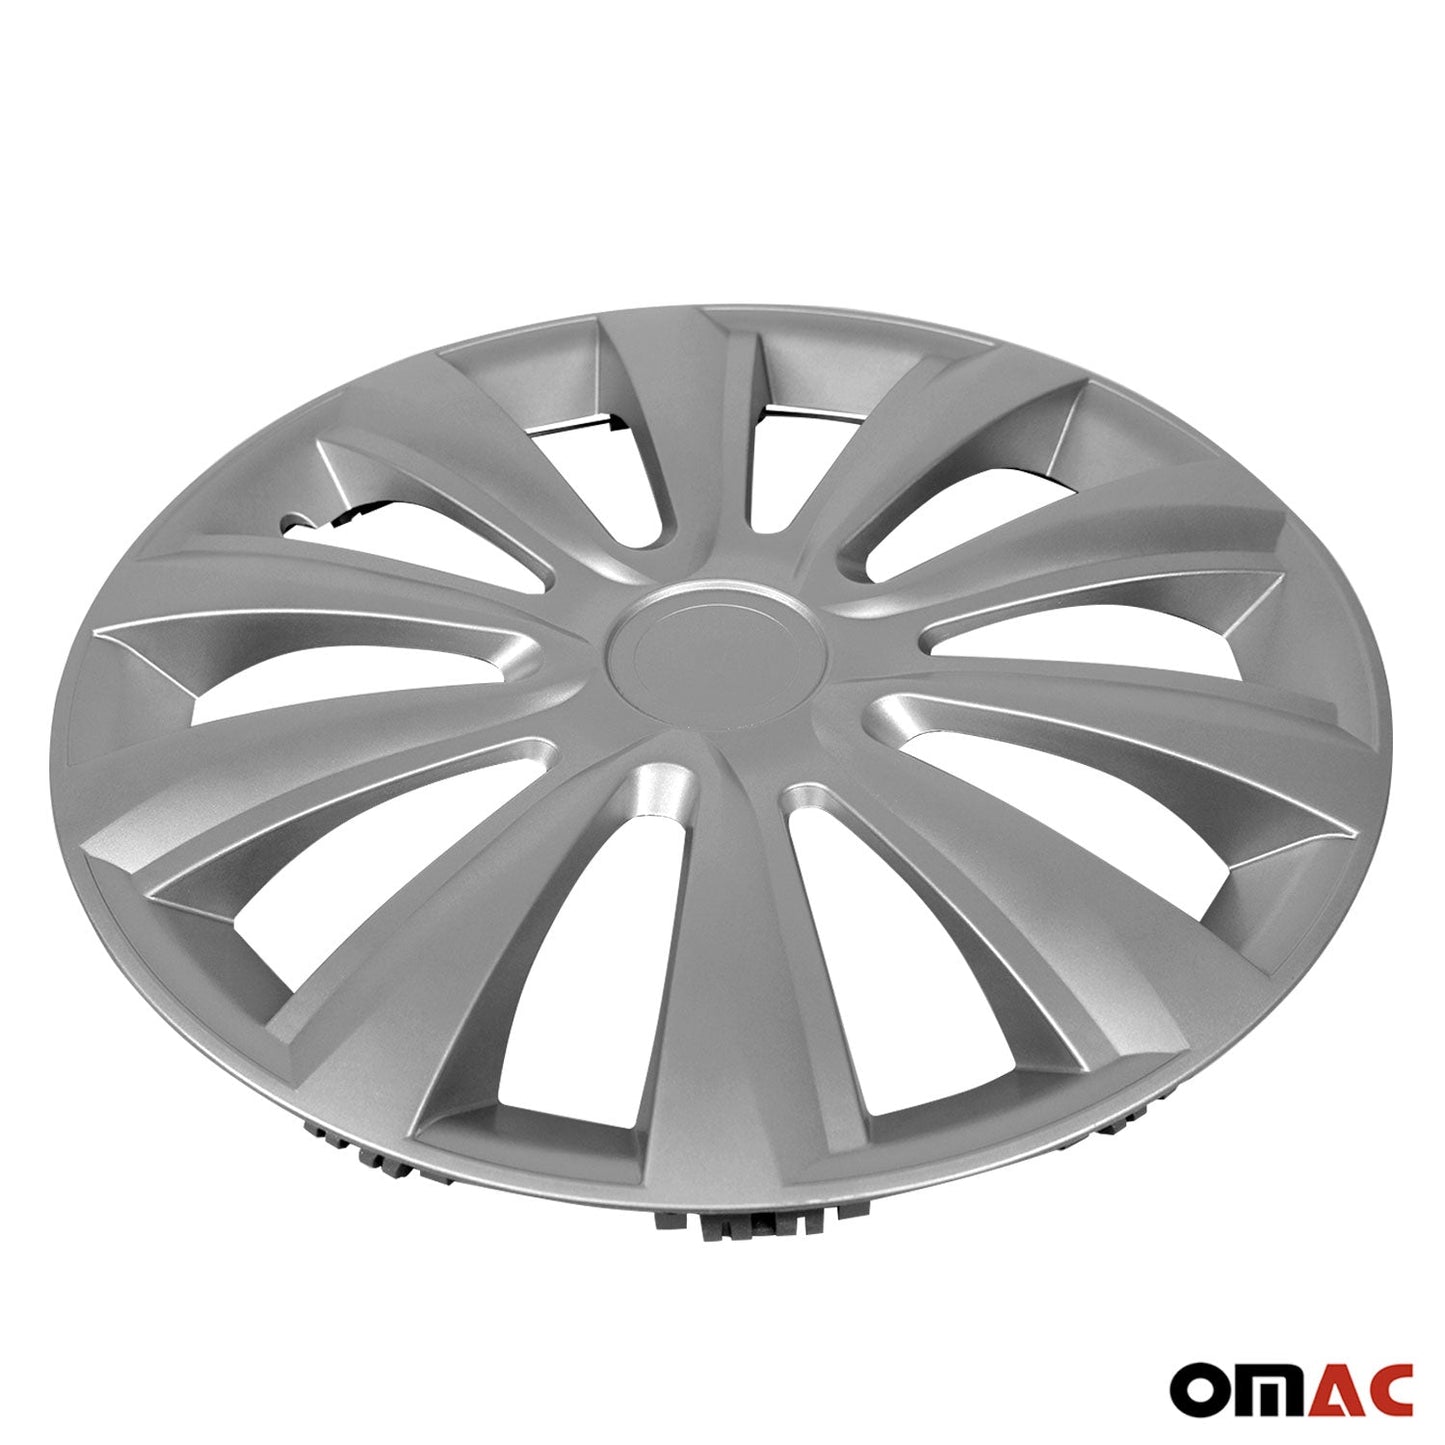 OMAC 16 Inch Wheel Covers Hubcaps for Mercedes ABS Silver 4Pcs G002346